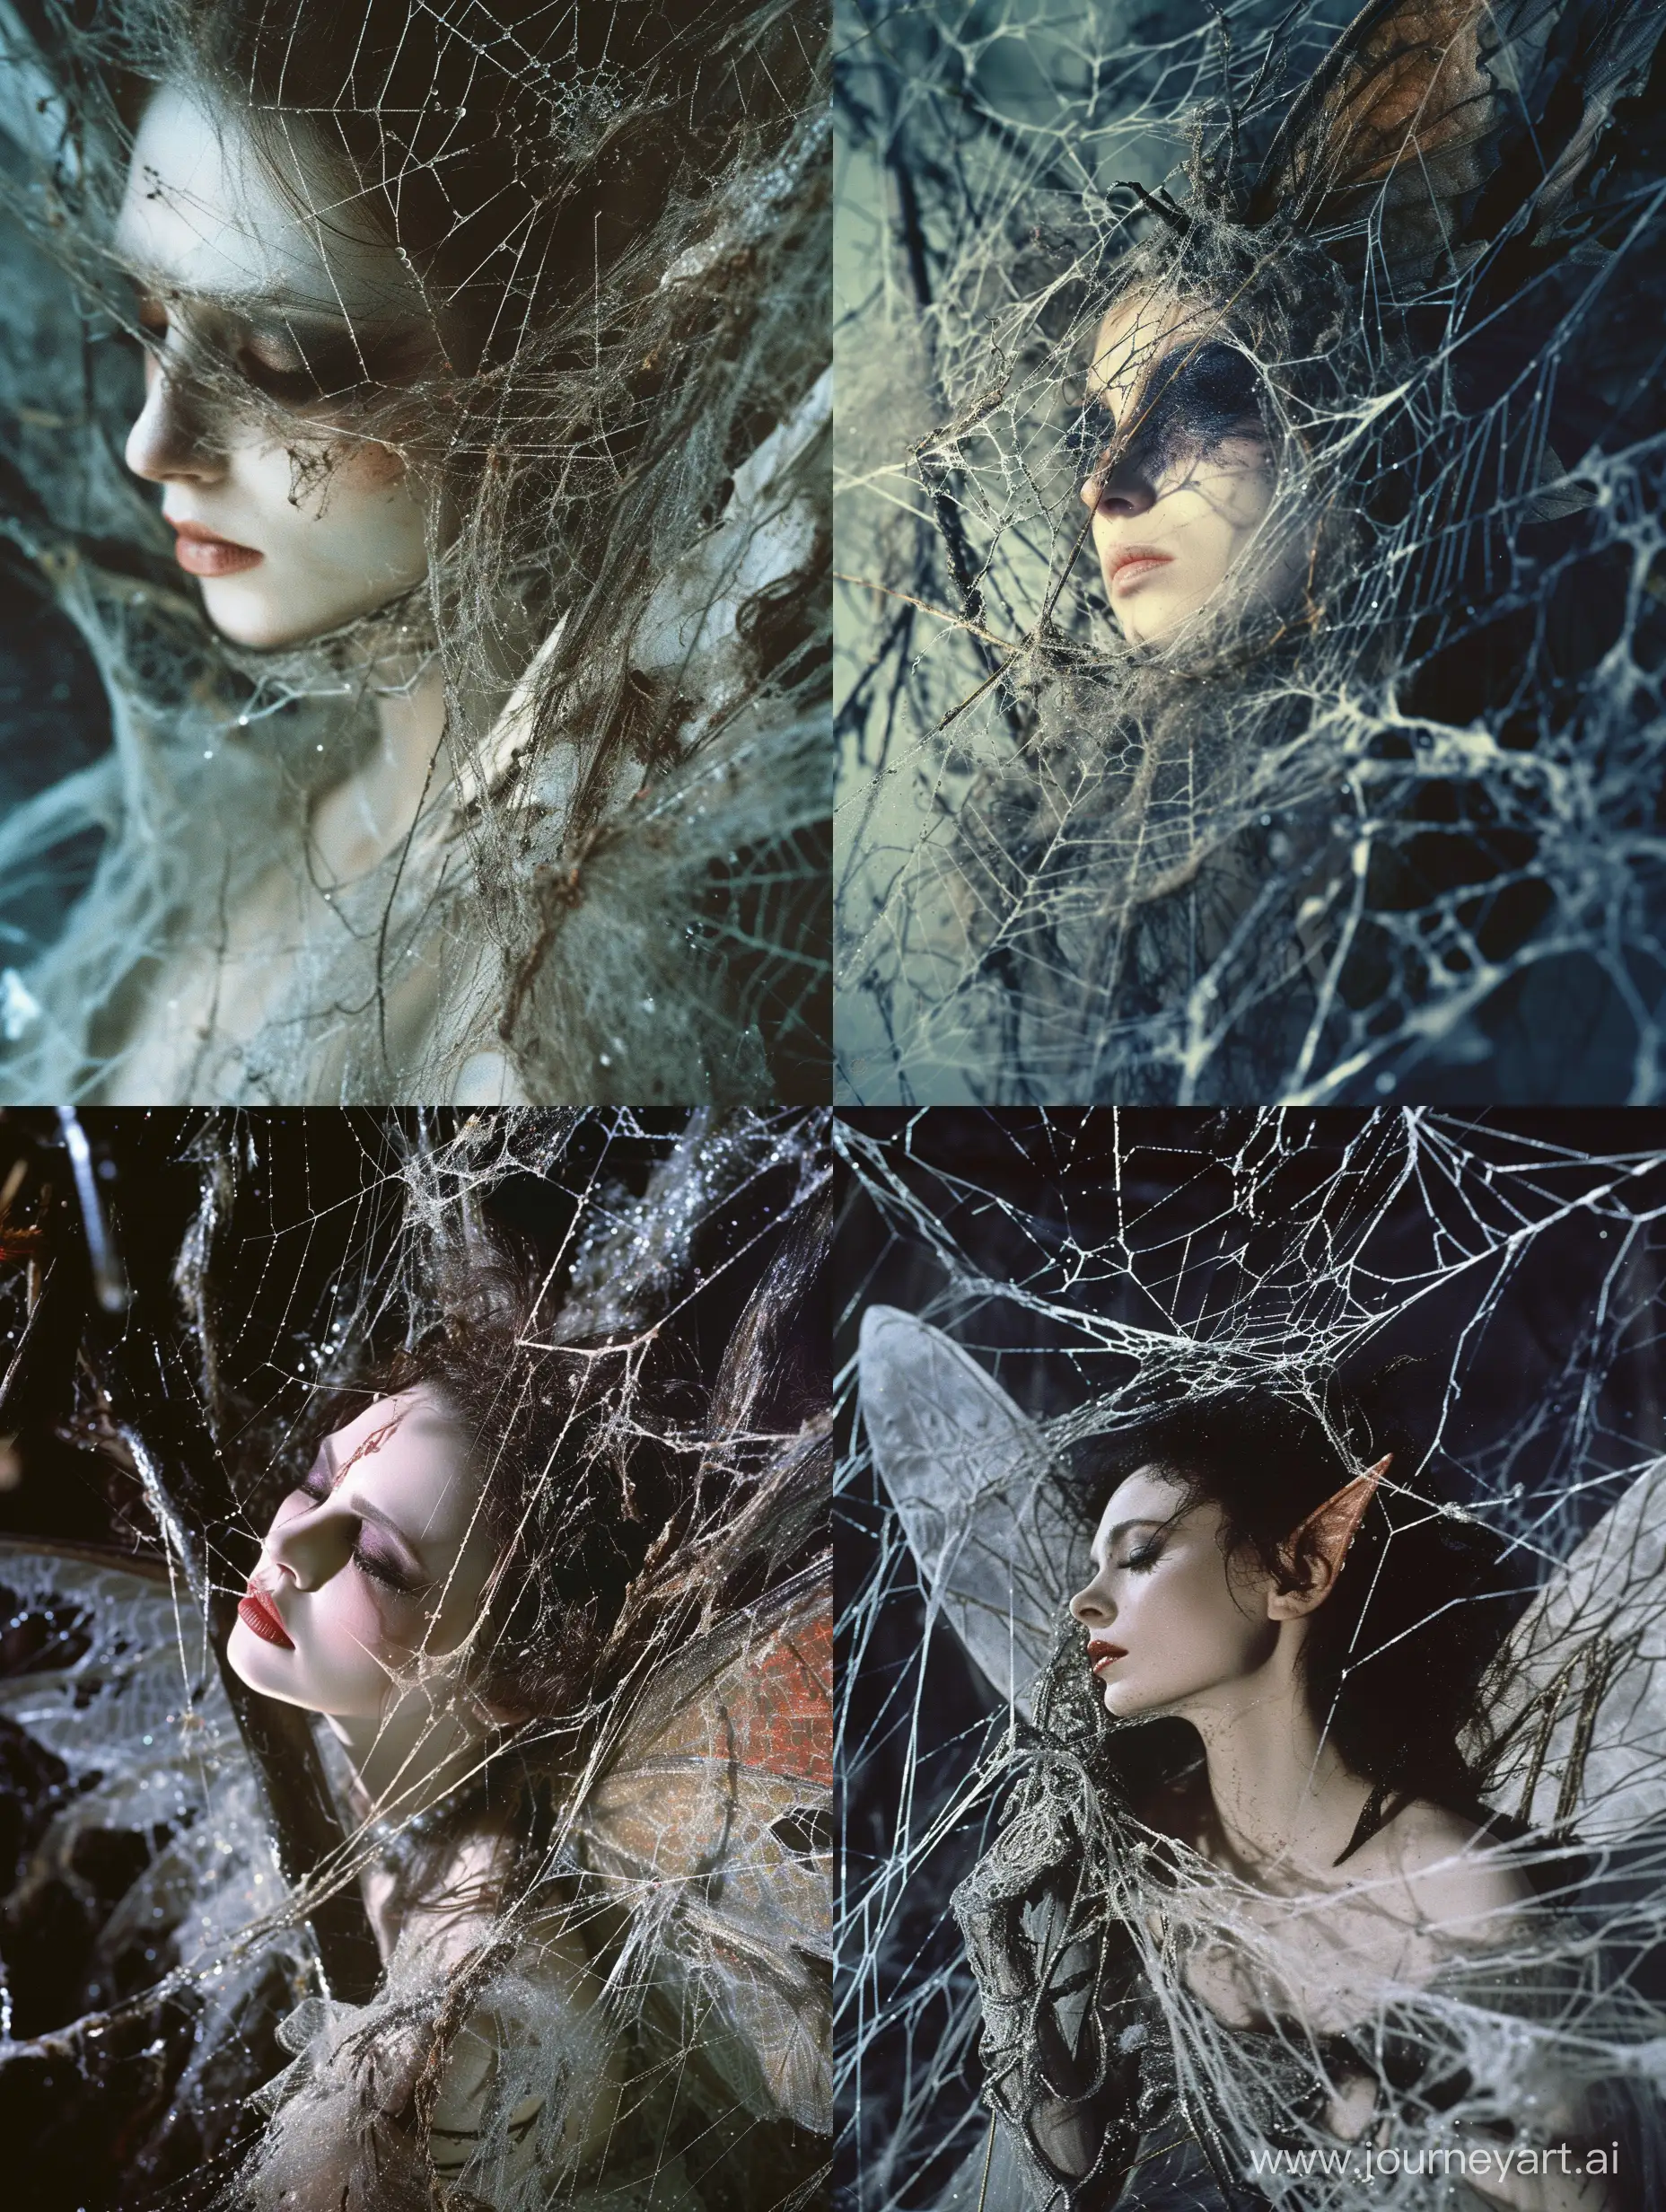 Captivating-Horror-Core-Image-Mesmerizing-Fairy-Trapped-in-Sinister-Spiderweb